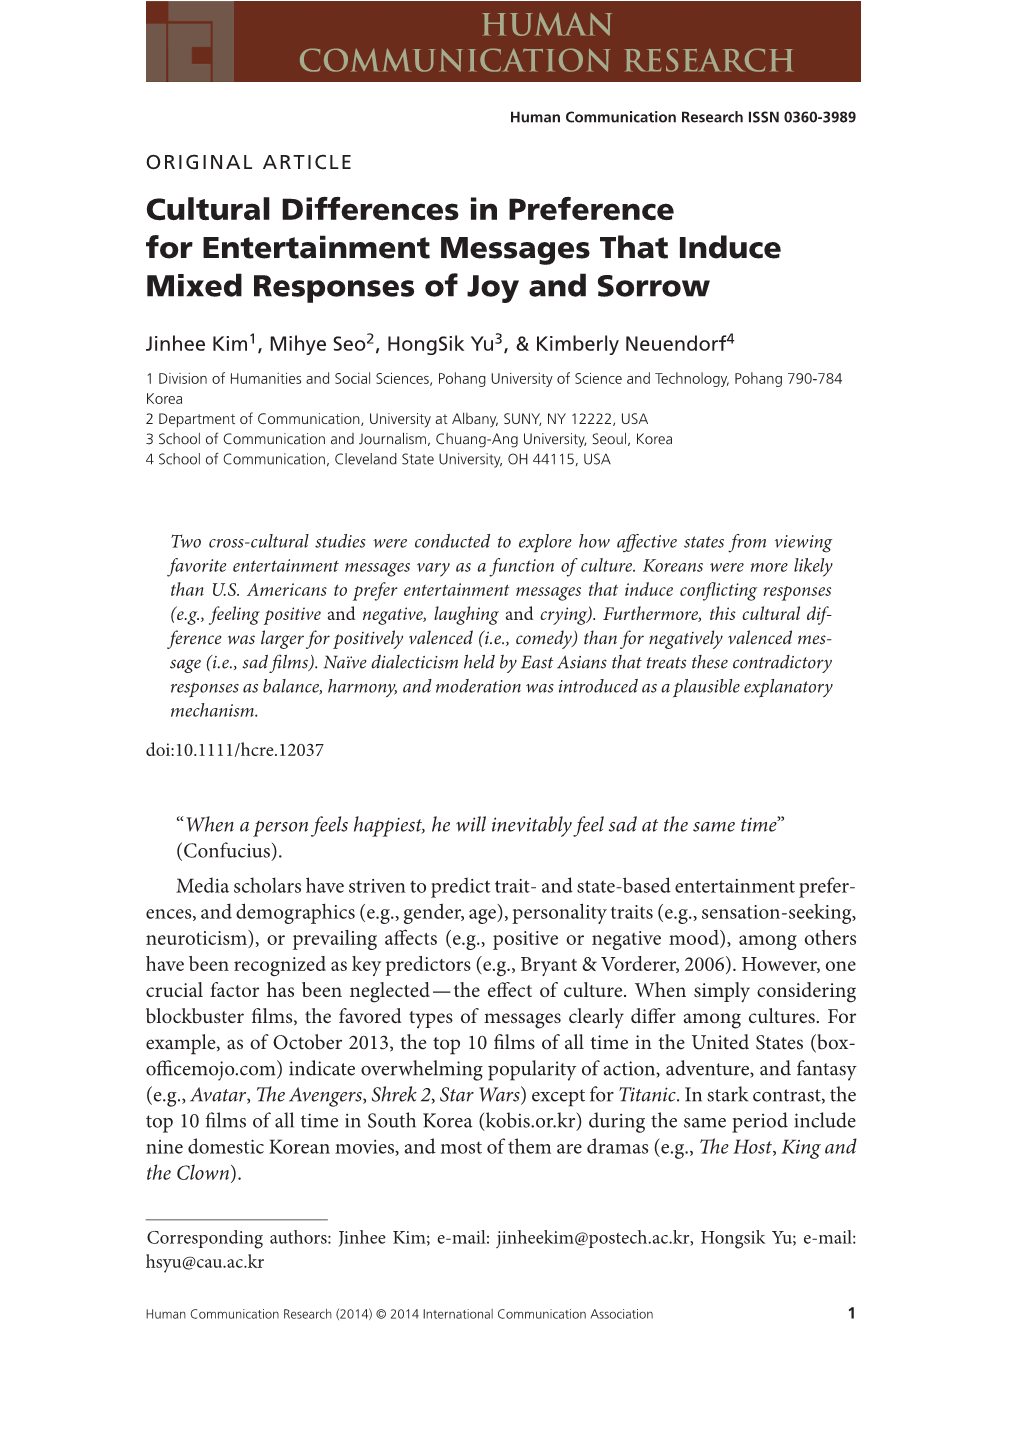 Cultural Differences in Preference for Entertainment Messages That Induce Mixed Responses of Joy and Sorrow